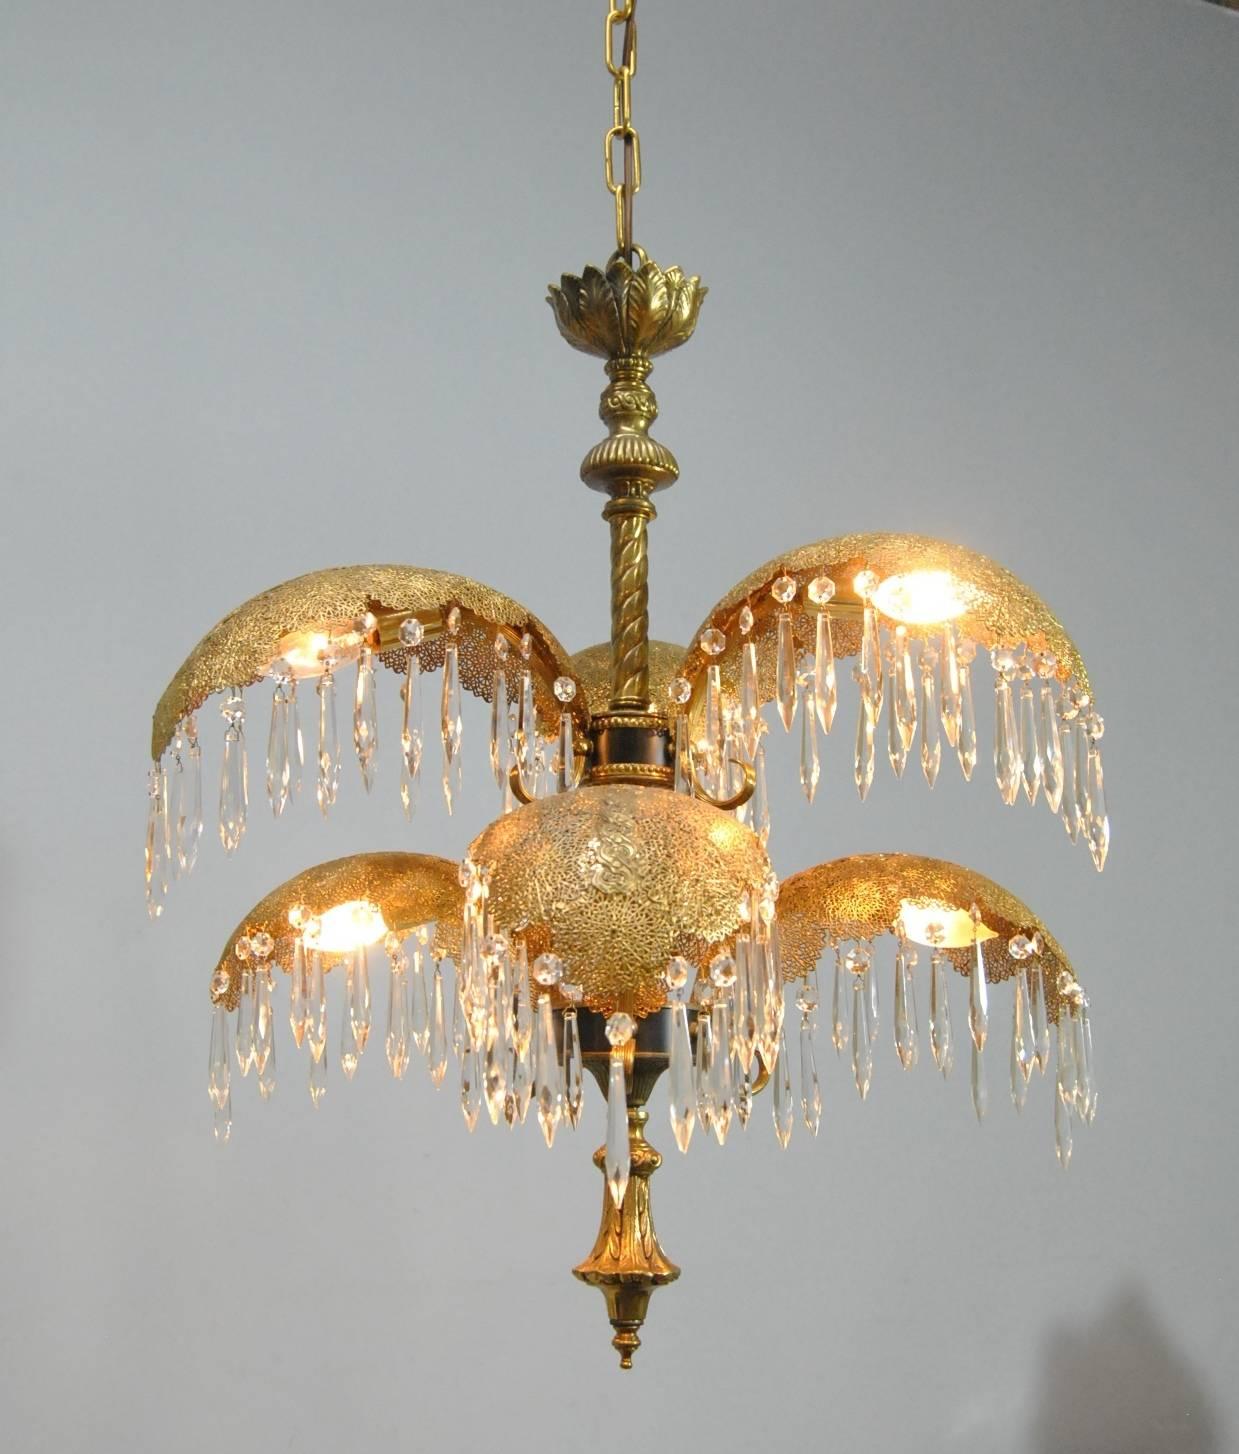 An unusual Italian brass chandelier. Chandelier has six palm frond style arms with hanging crystal prisms. Fronds are attached to a twisted brass rod with crown and lower finial carrying through the folage theme. The 28